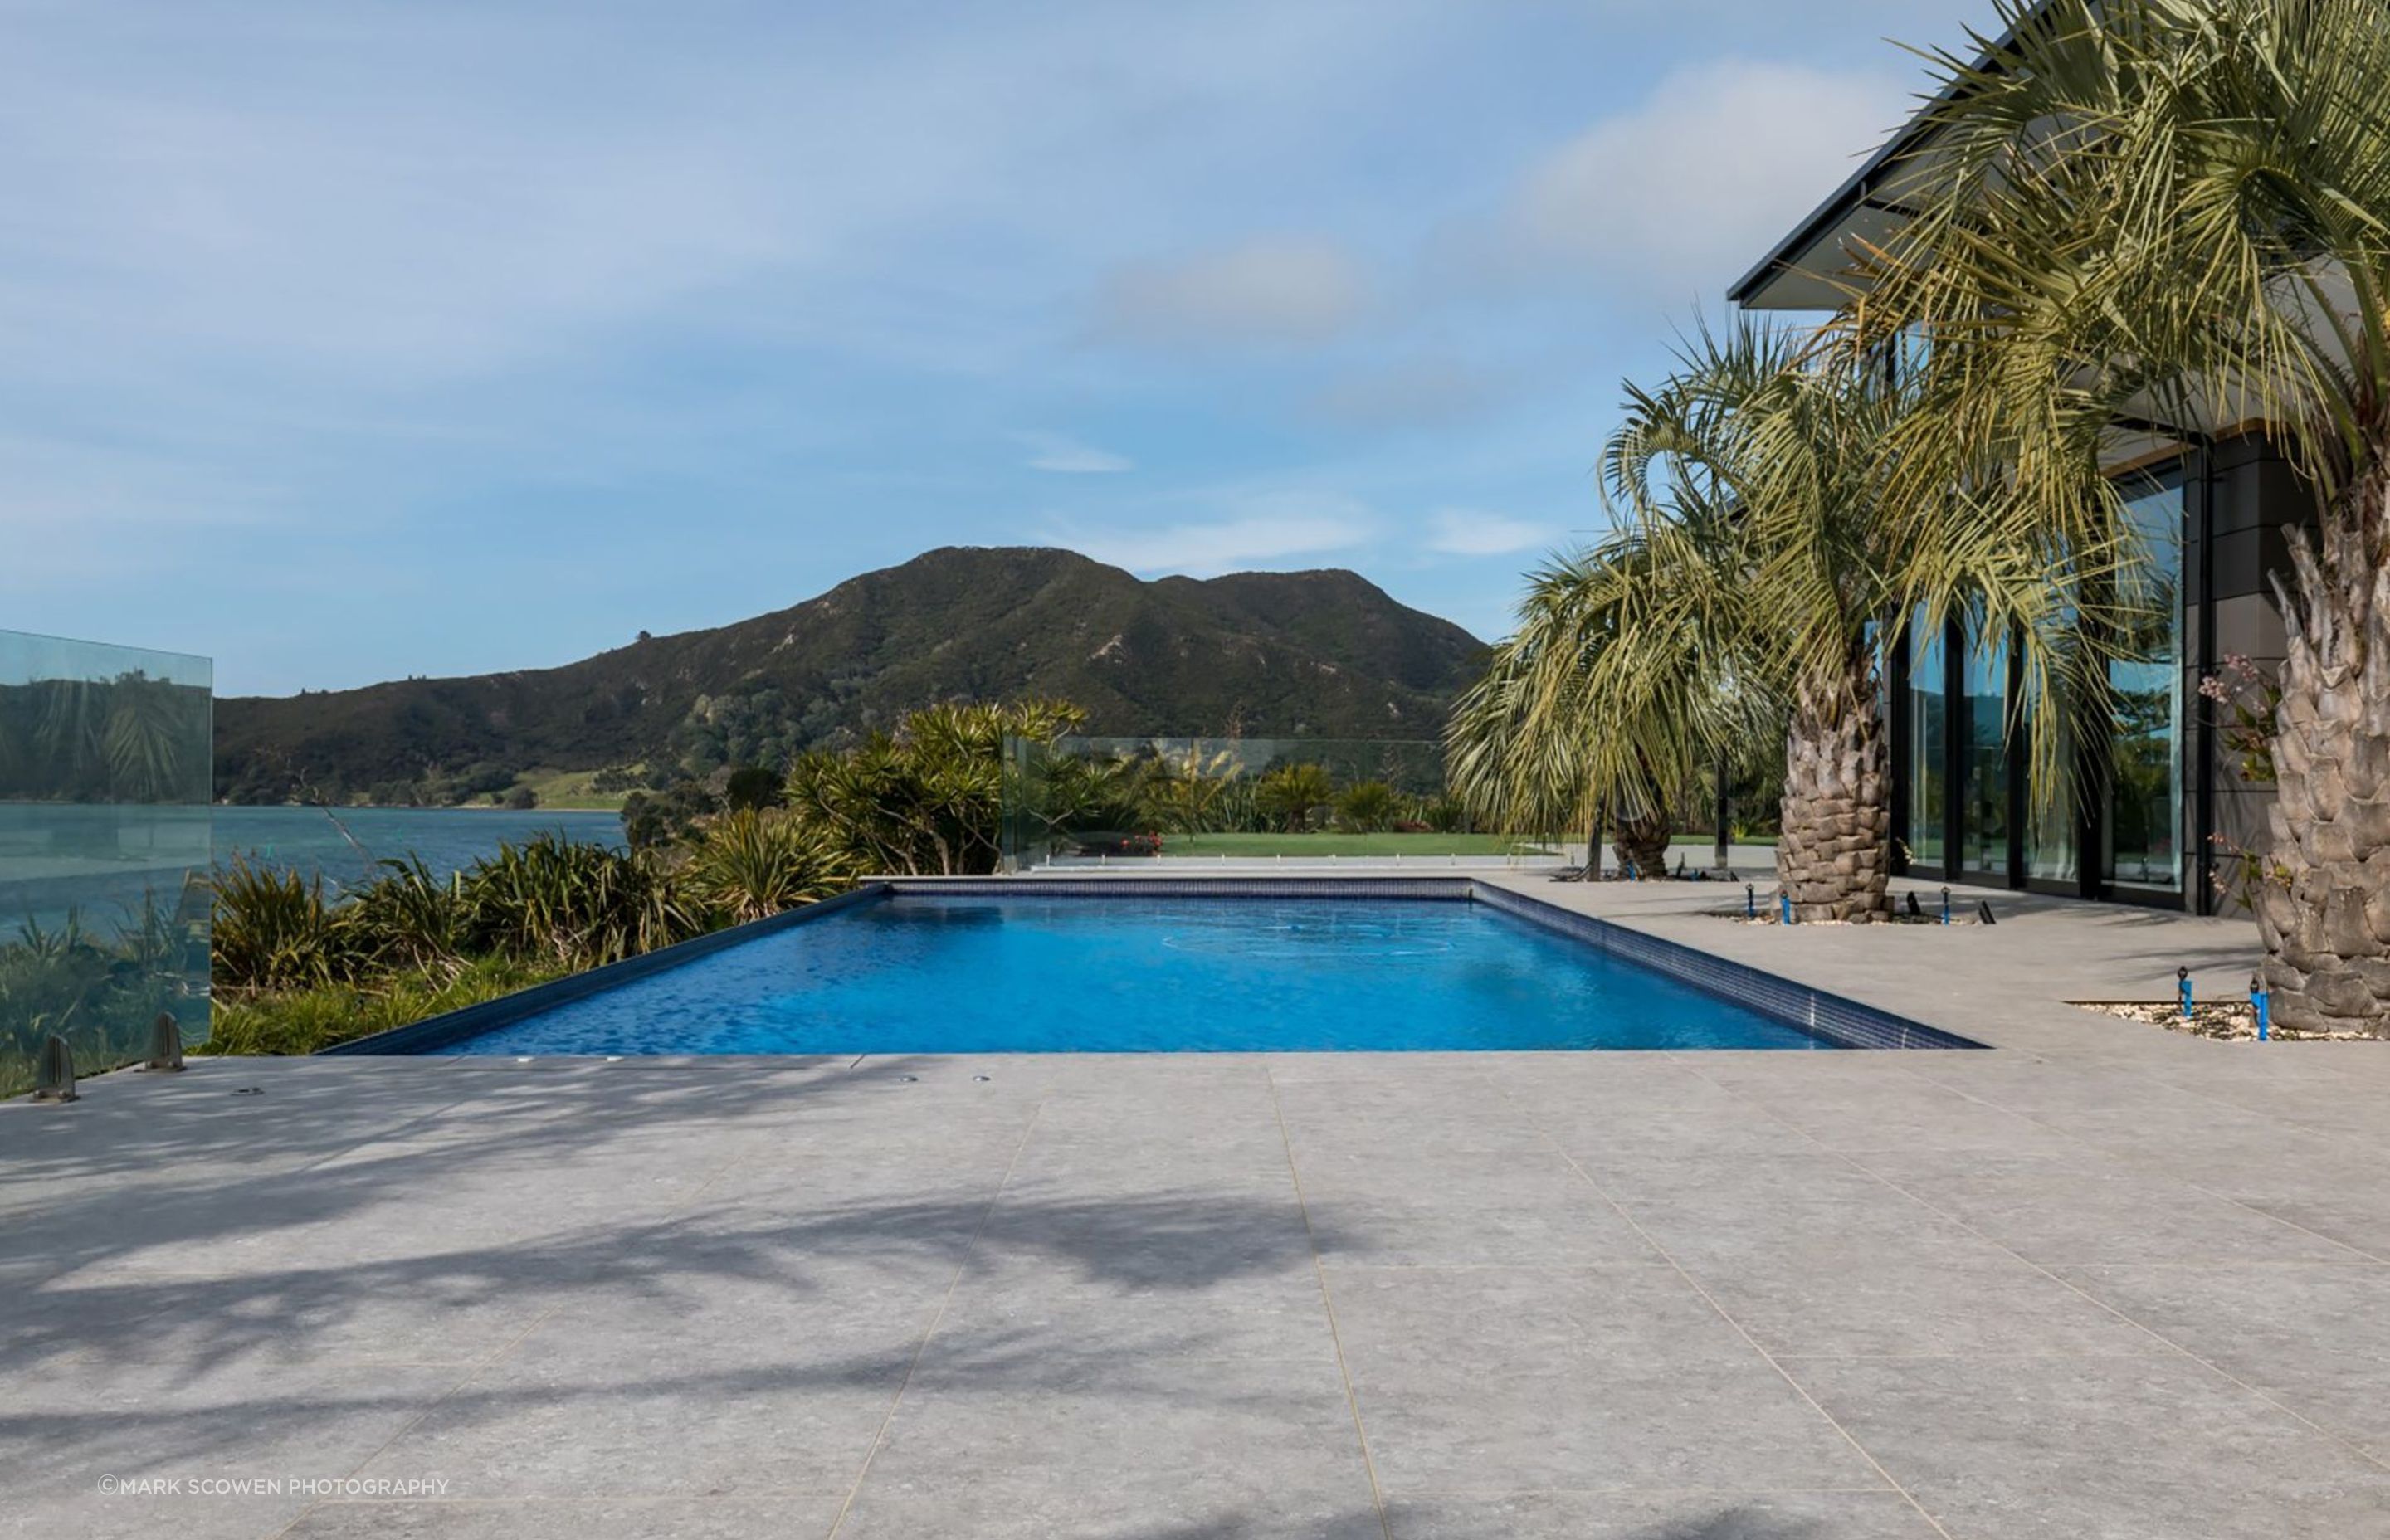 A view from the swimming pool area looking at Tohoraha (otherwise known as Mt Camel or Mt Houhora), a 236m-tall hill that Kupe mistook for a whale, according to Māori legend.